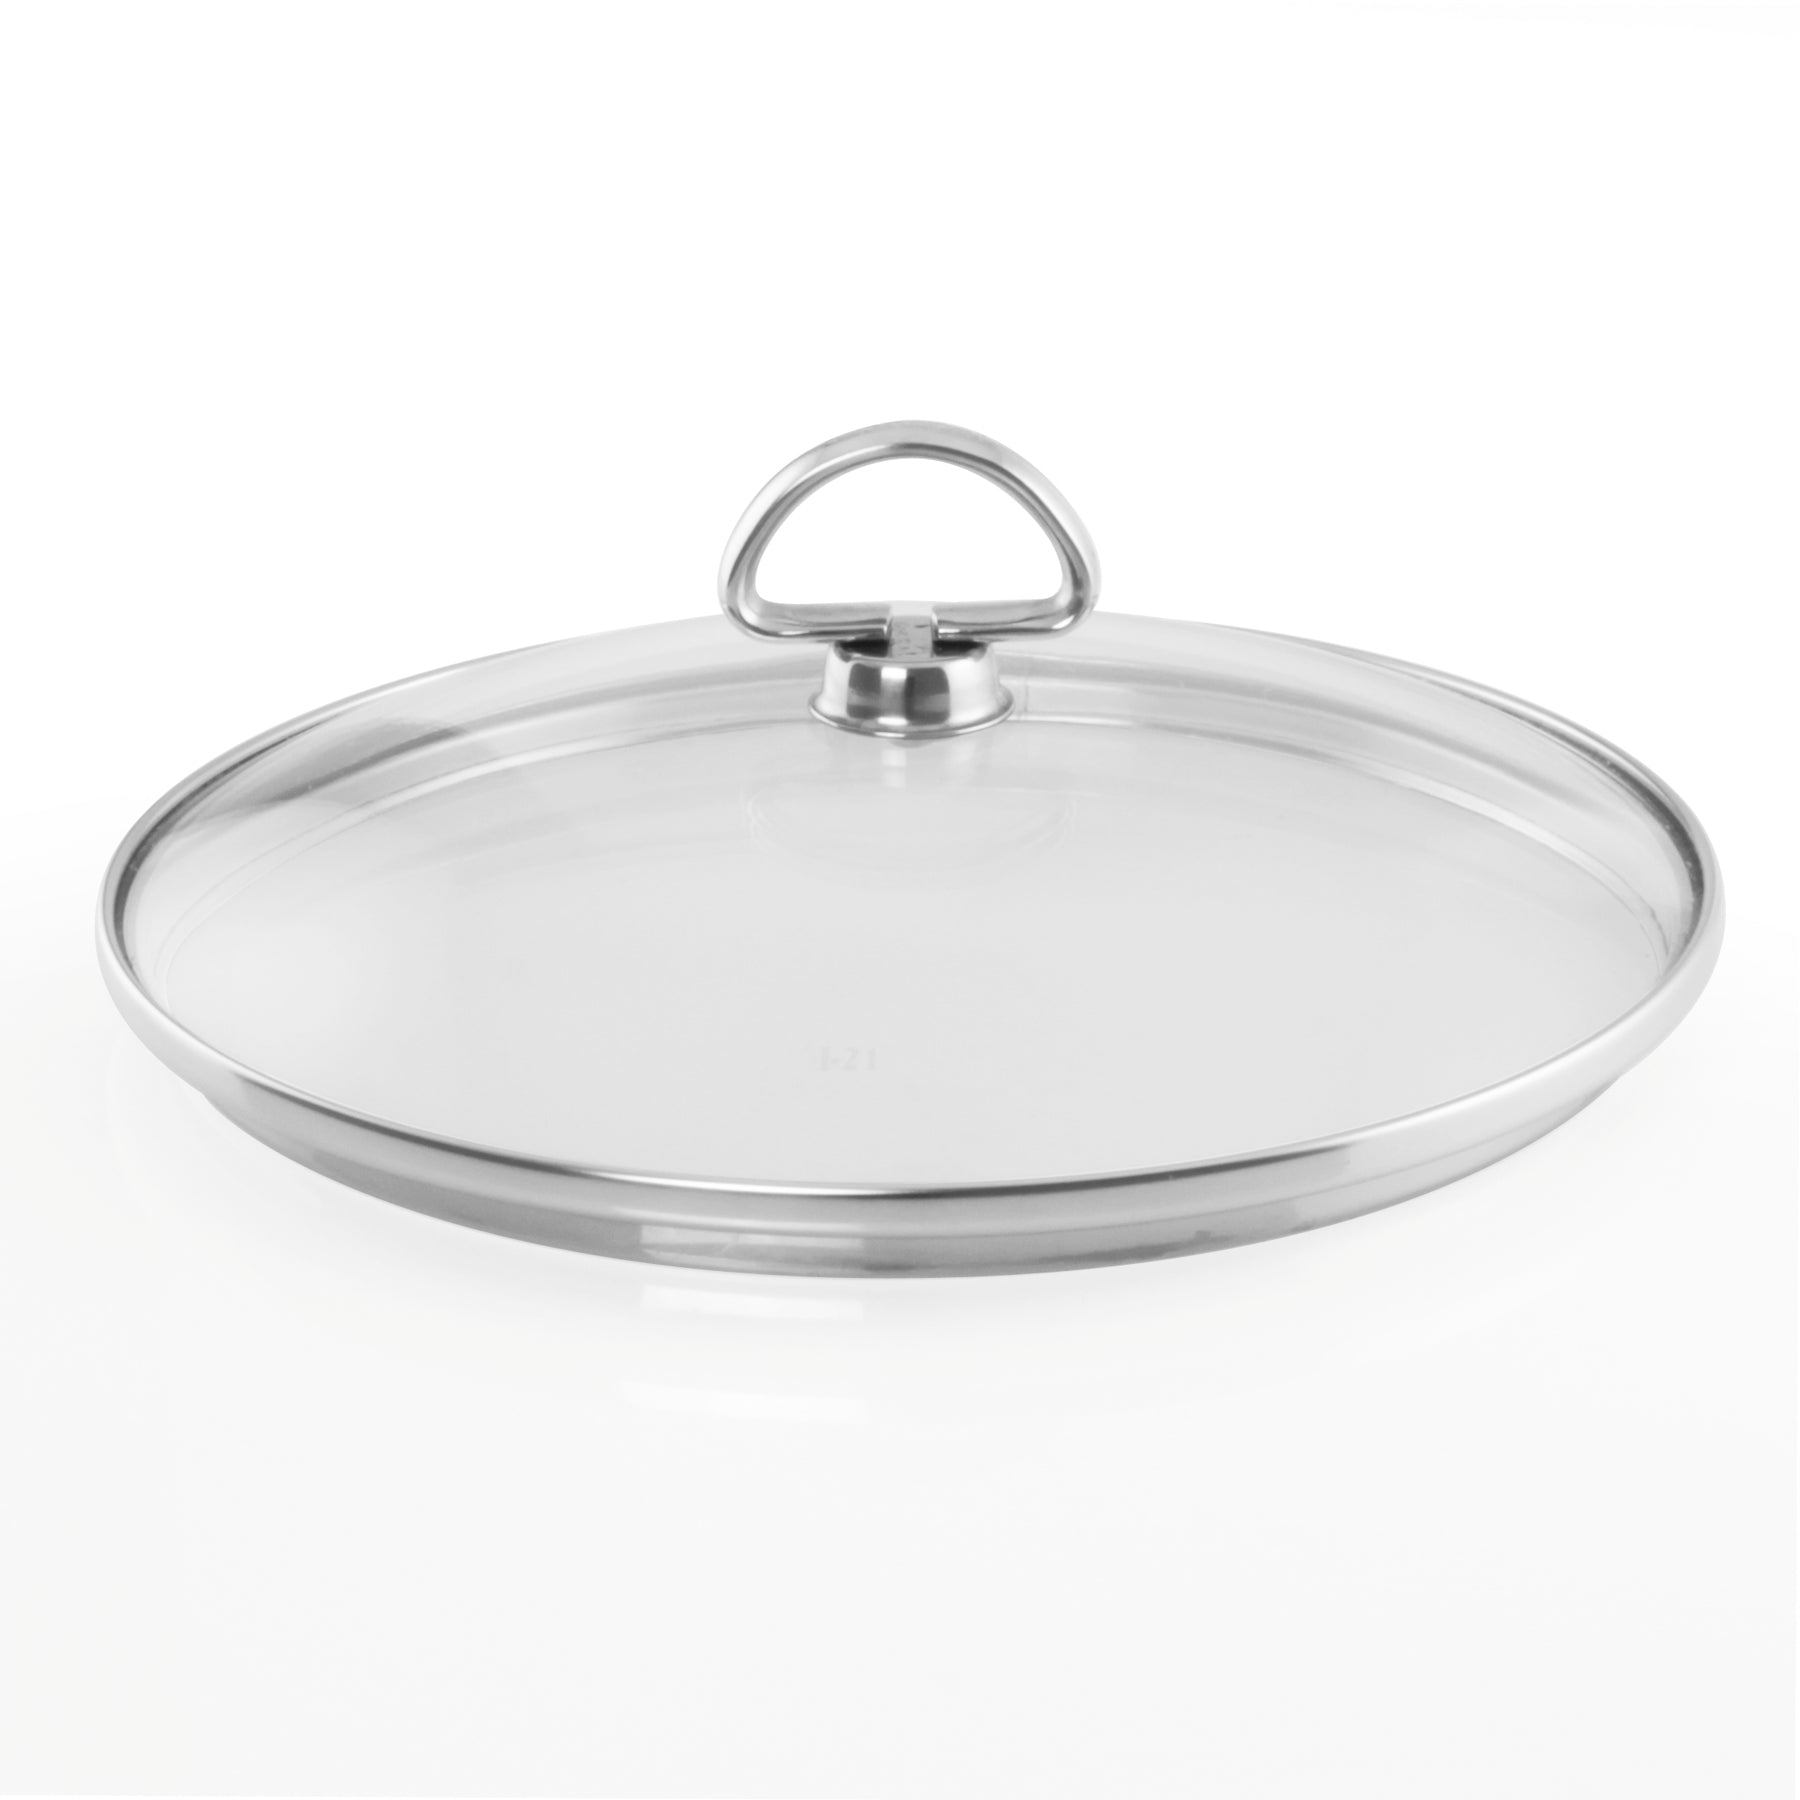 Chantal SLIN32-160 Induction 21 スチール Soup Pot with Glass